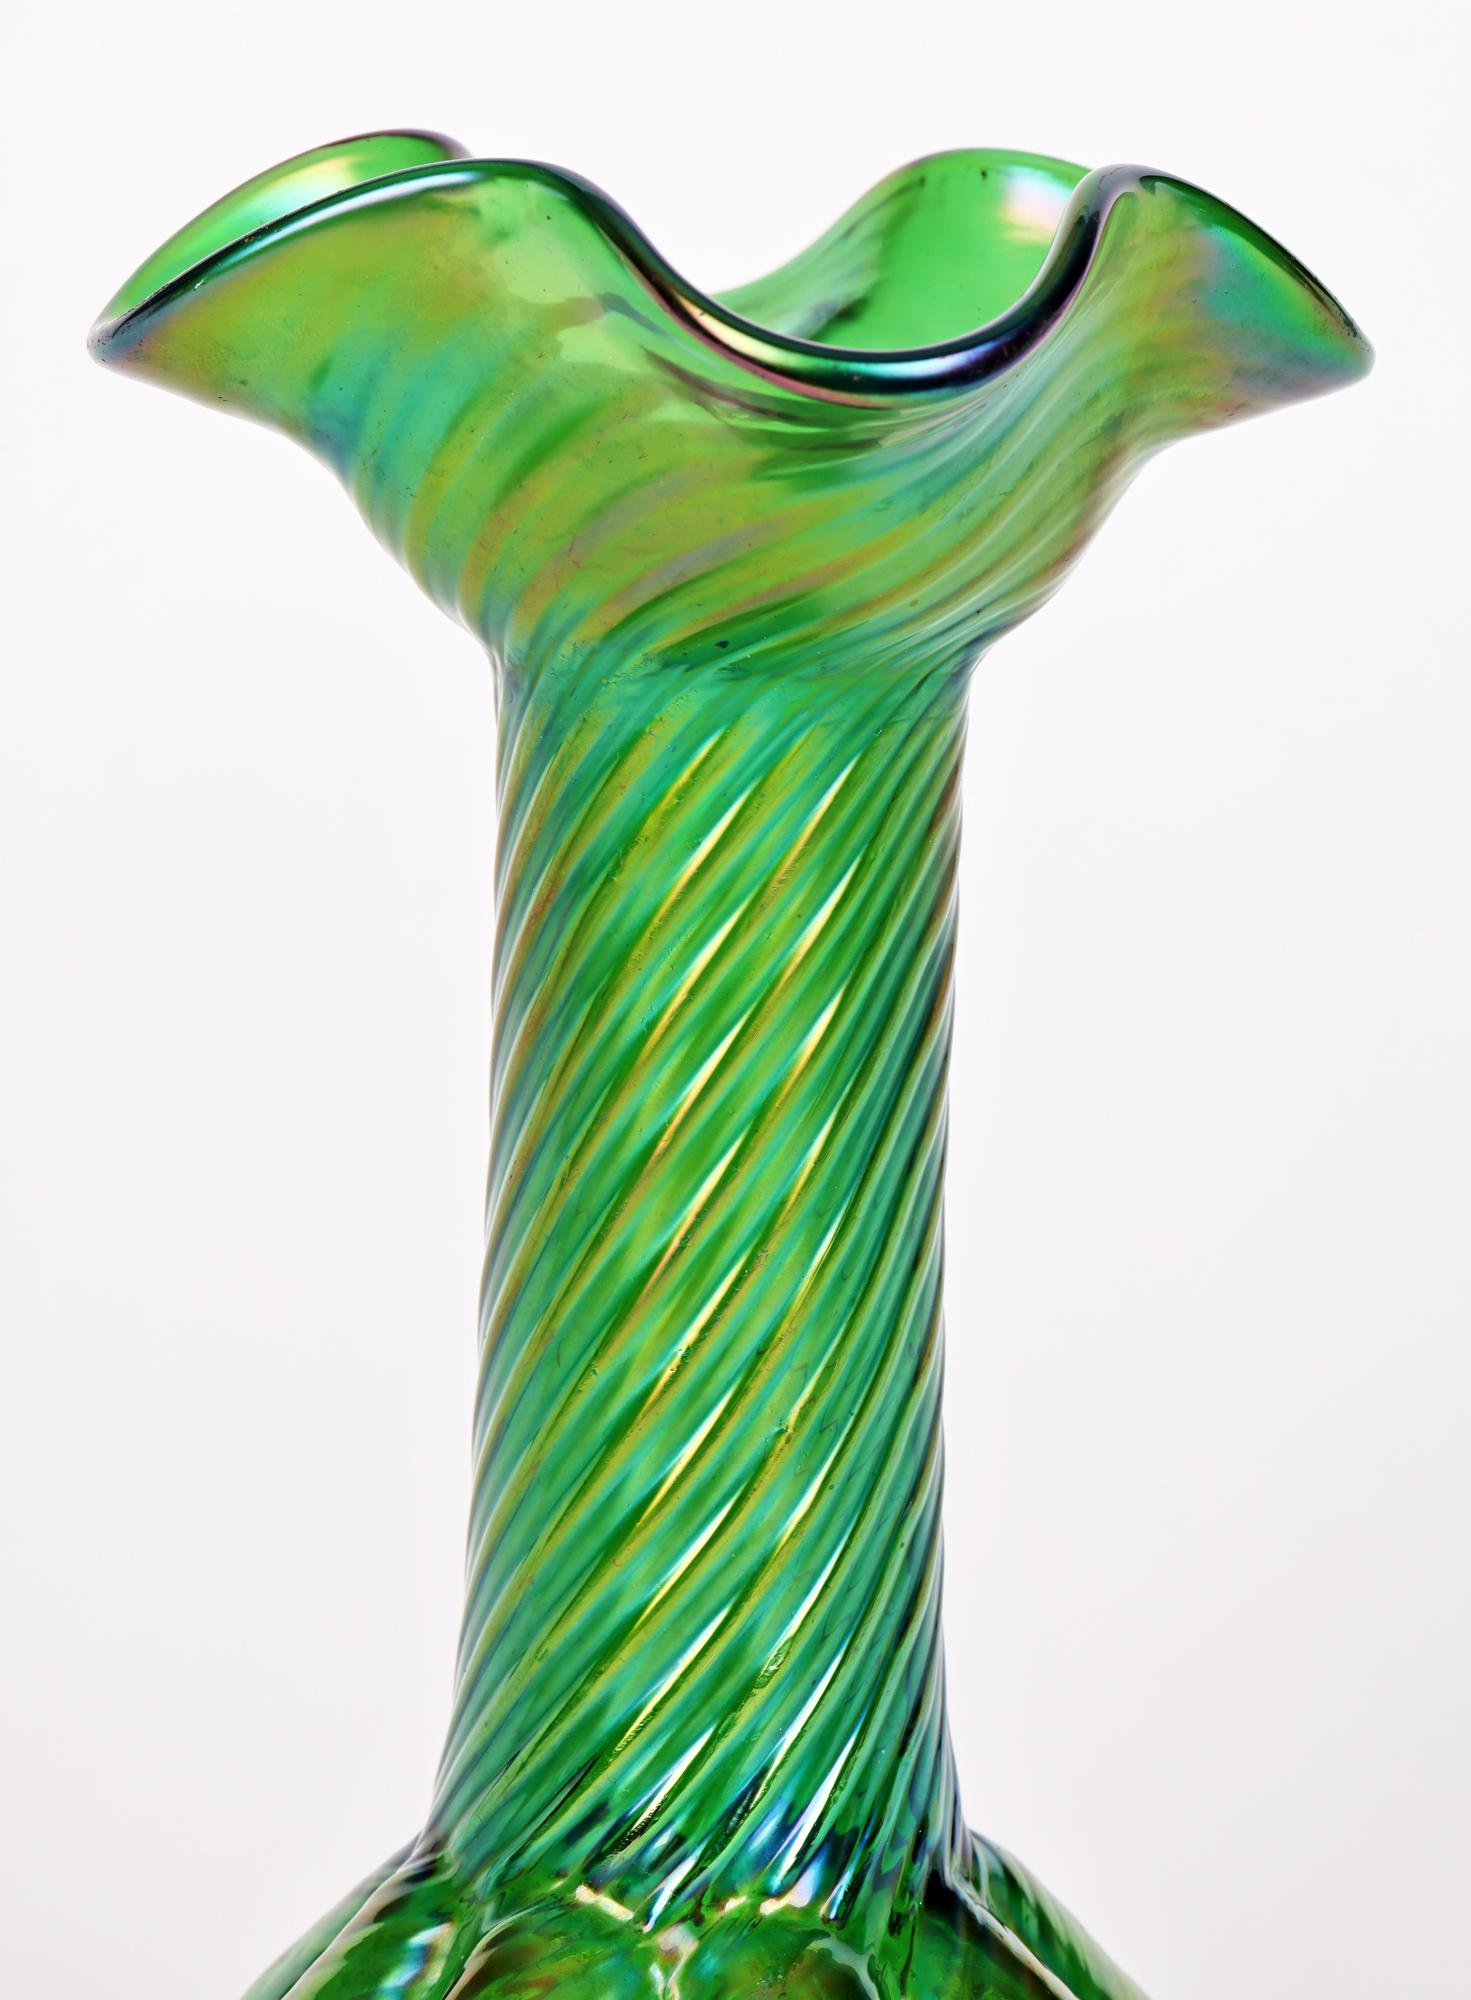 A simply stunning Art Nouveau iridescent flower bud shaped green art glass vase attributed to Kralik and dating from around 1900. The tall elegantly shaped vase is hand blown with a round eight section bulb shaped base tall slender body applied in